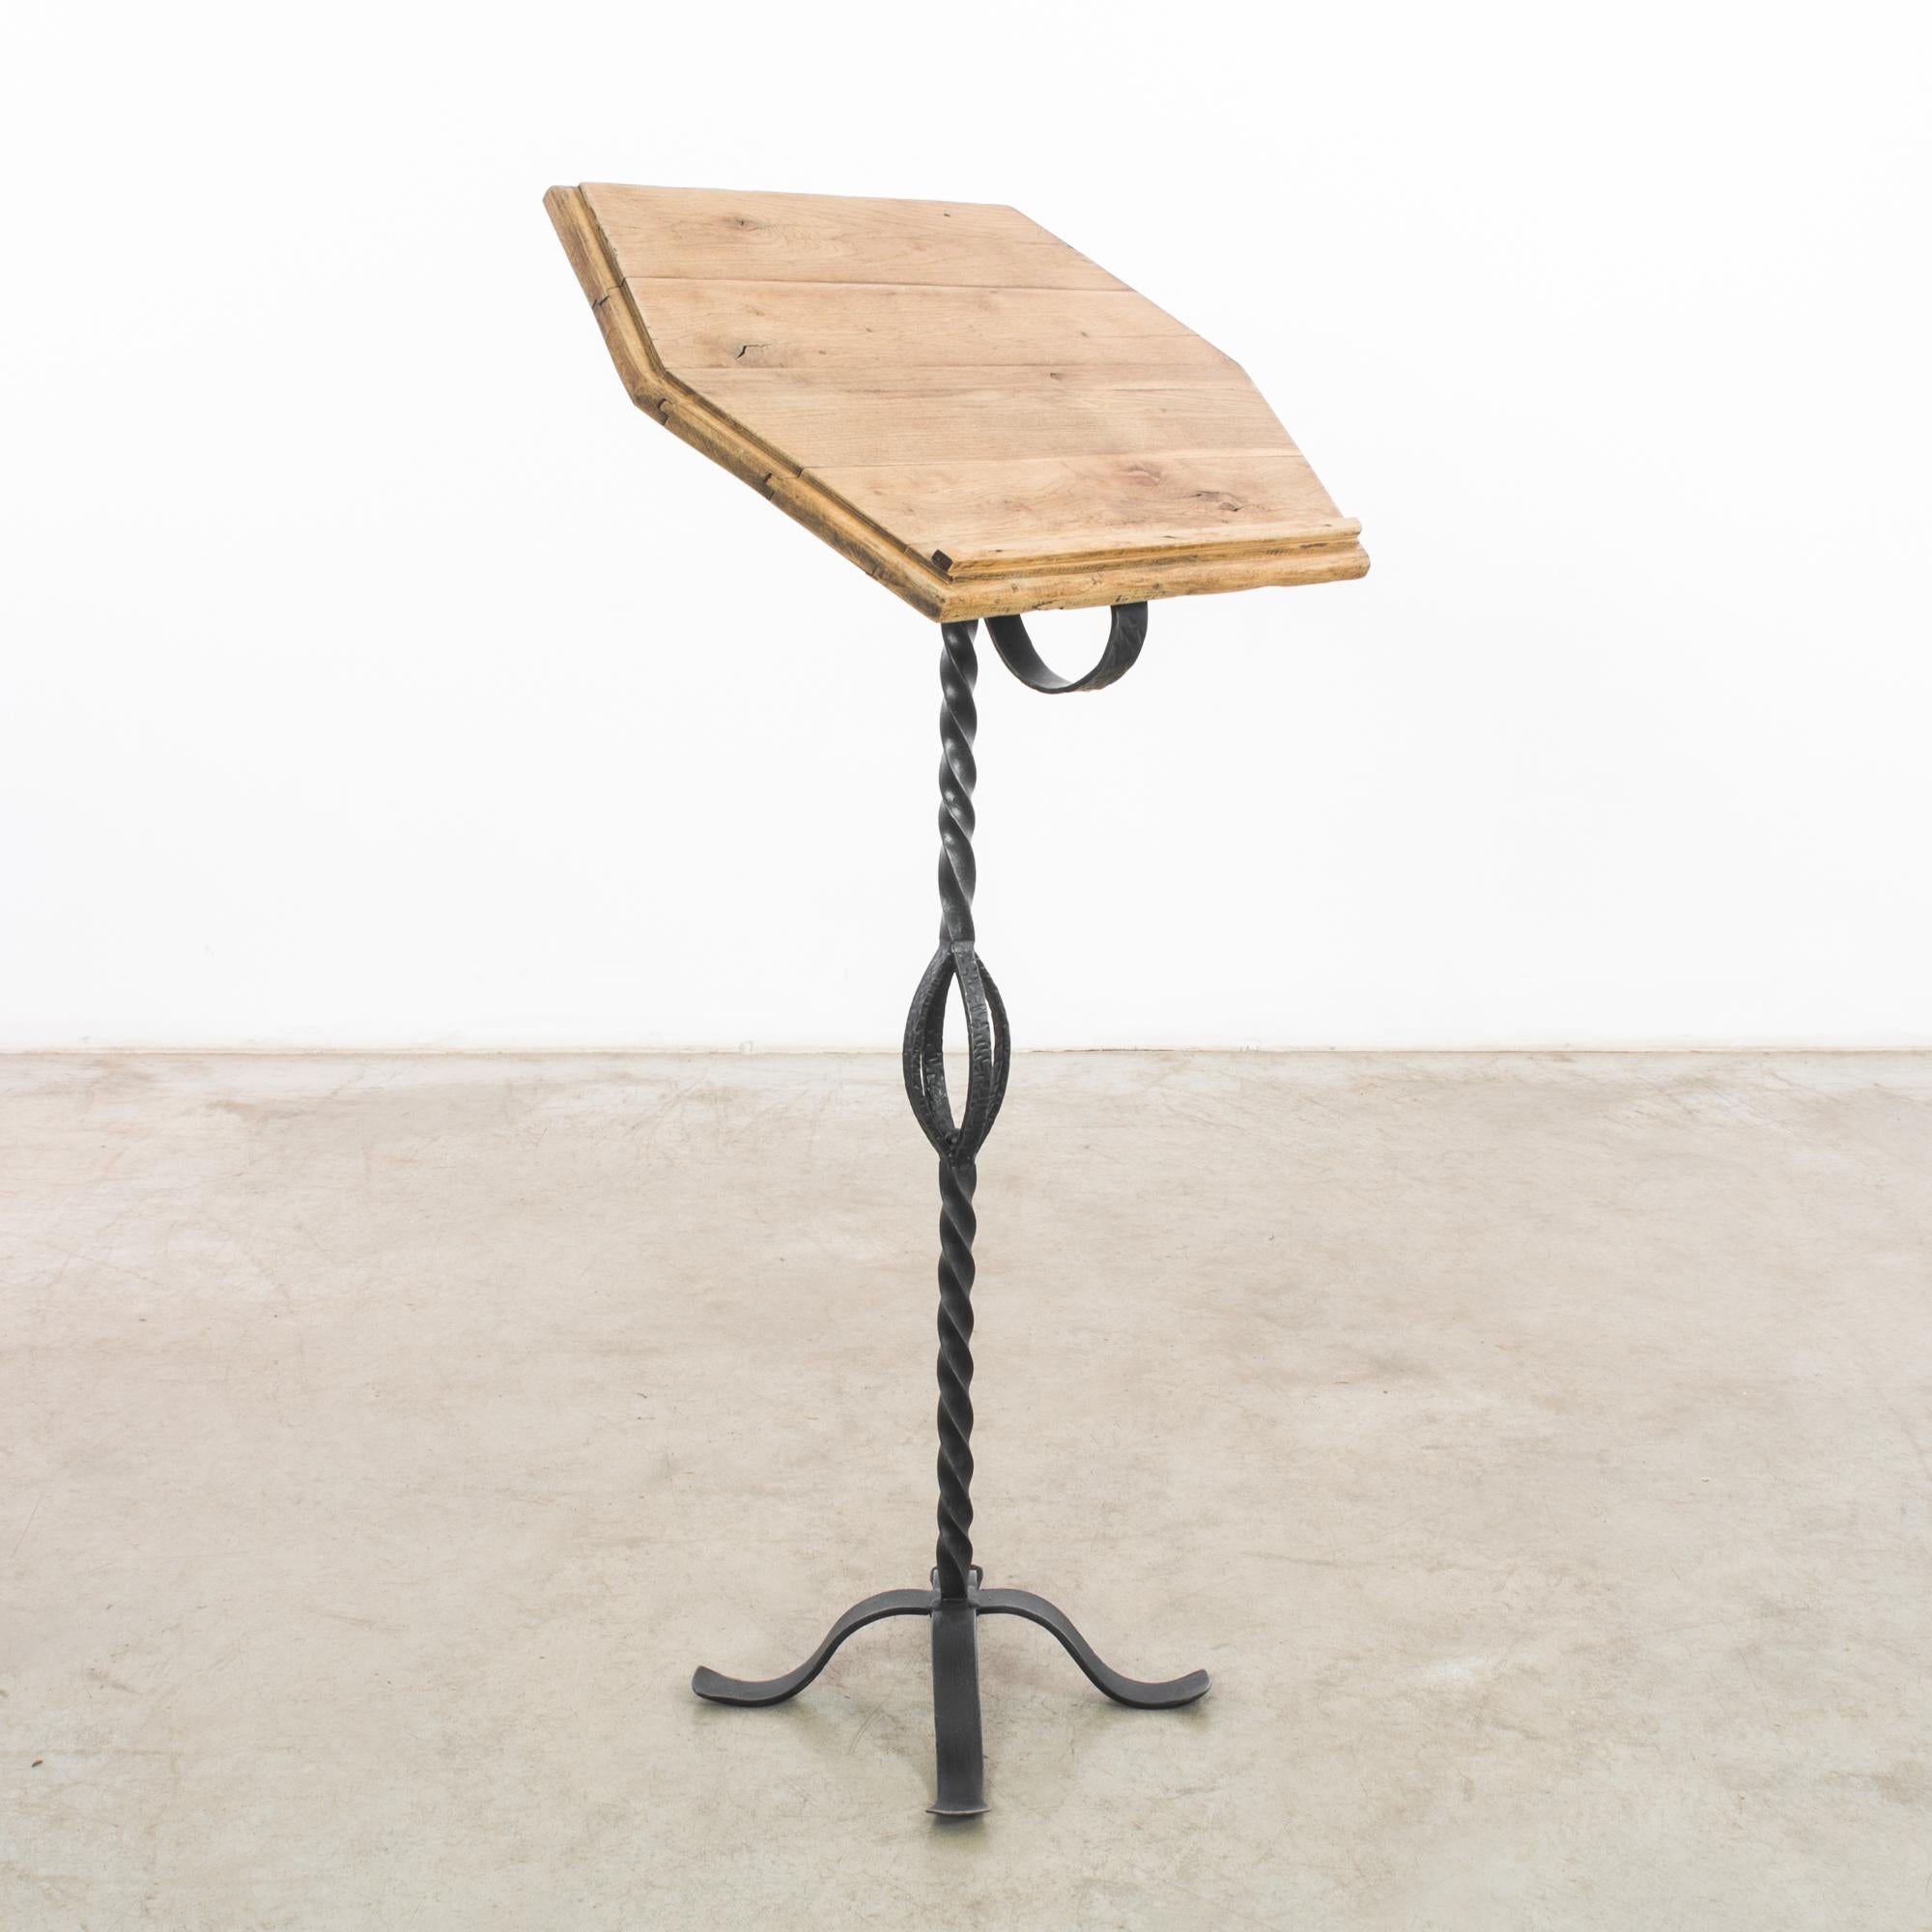 This 1950s Belgian iron book pedestal presents a unique fusion of rustic charm and functional design. The stand, crafted from wrought iron with a distinctive twisted design, culminates in a looped handle that adds an artistic flourish to its sturdy